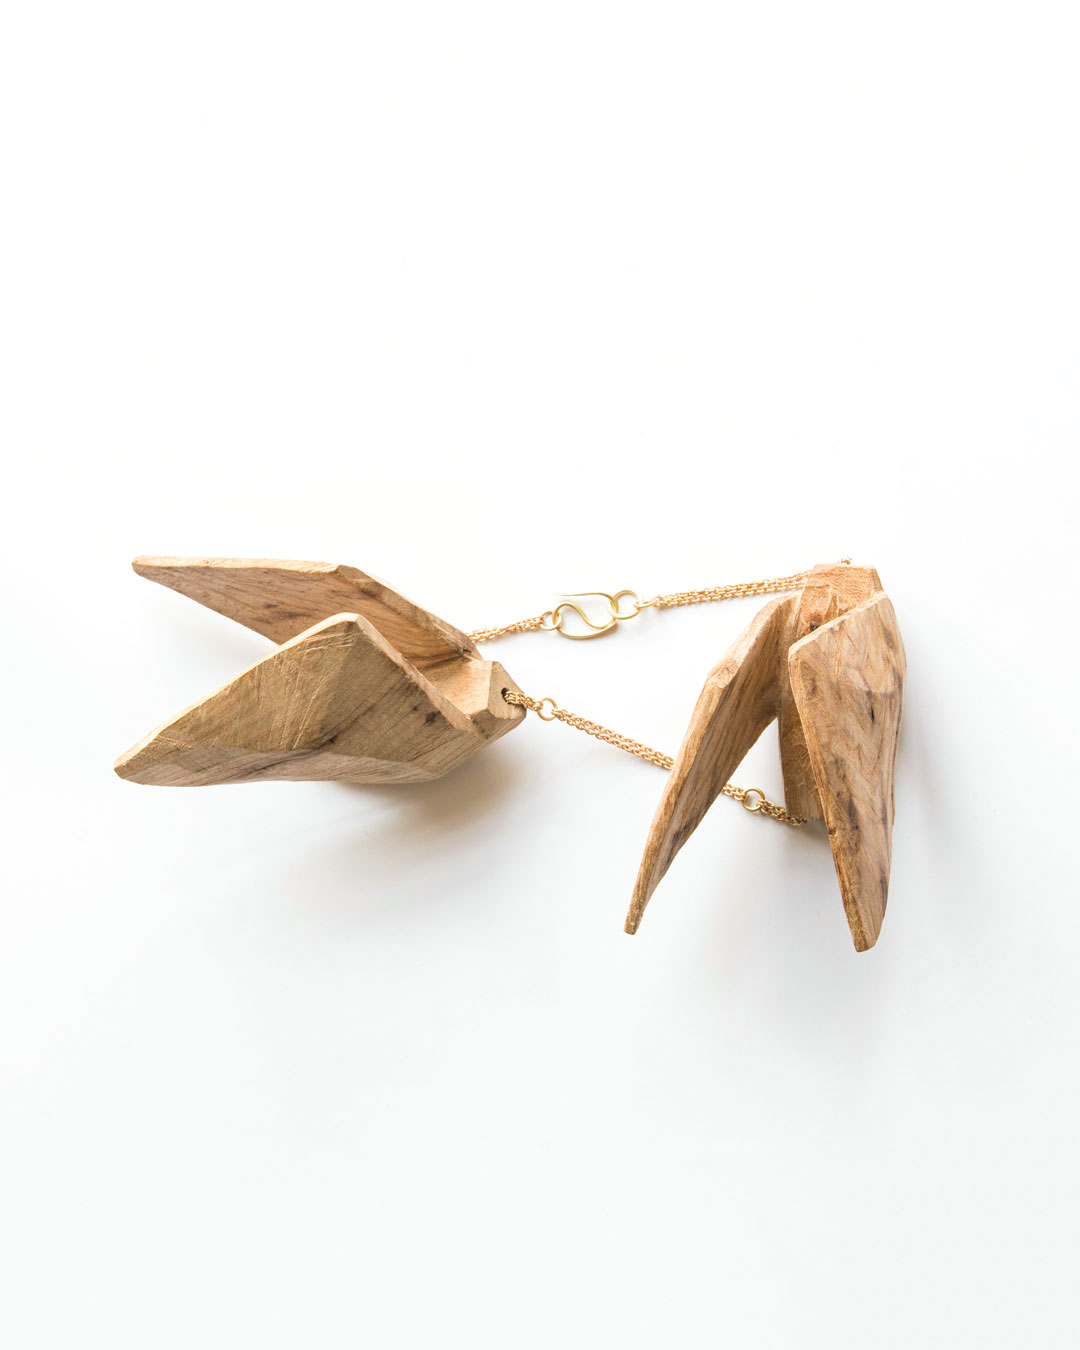 Dorothea Prühl, necklace, Two Large Birds, 2020, elm wood and gold, price on request